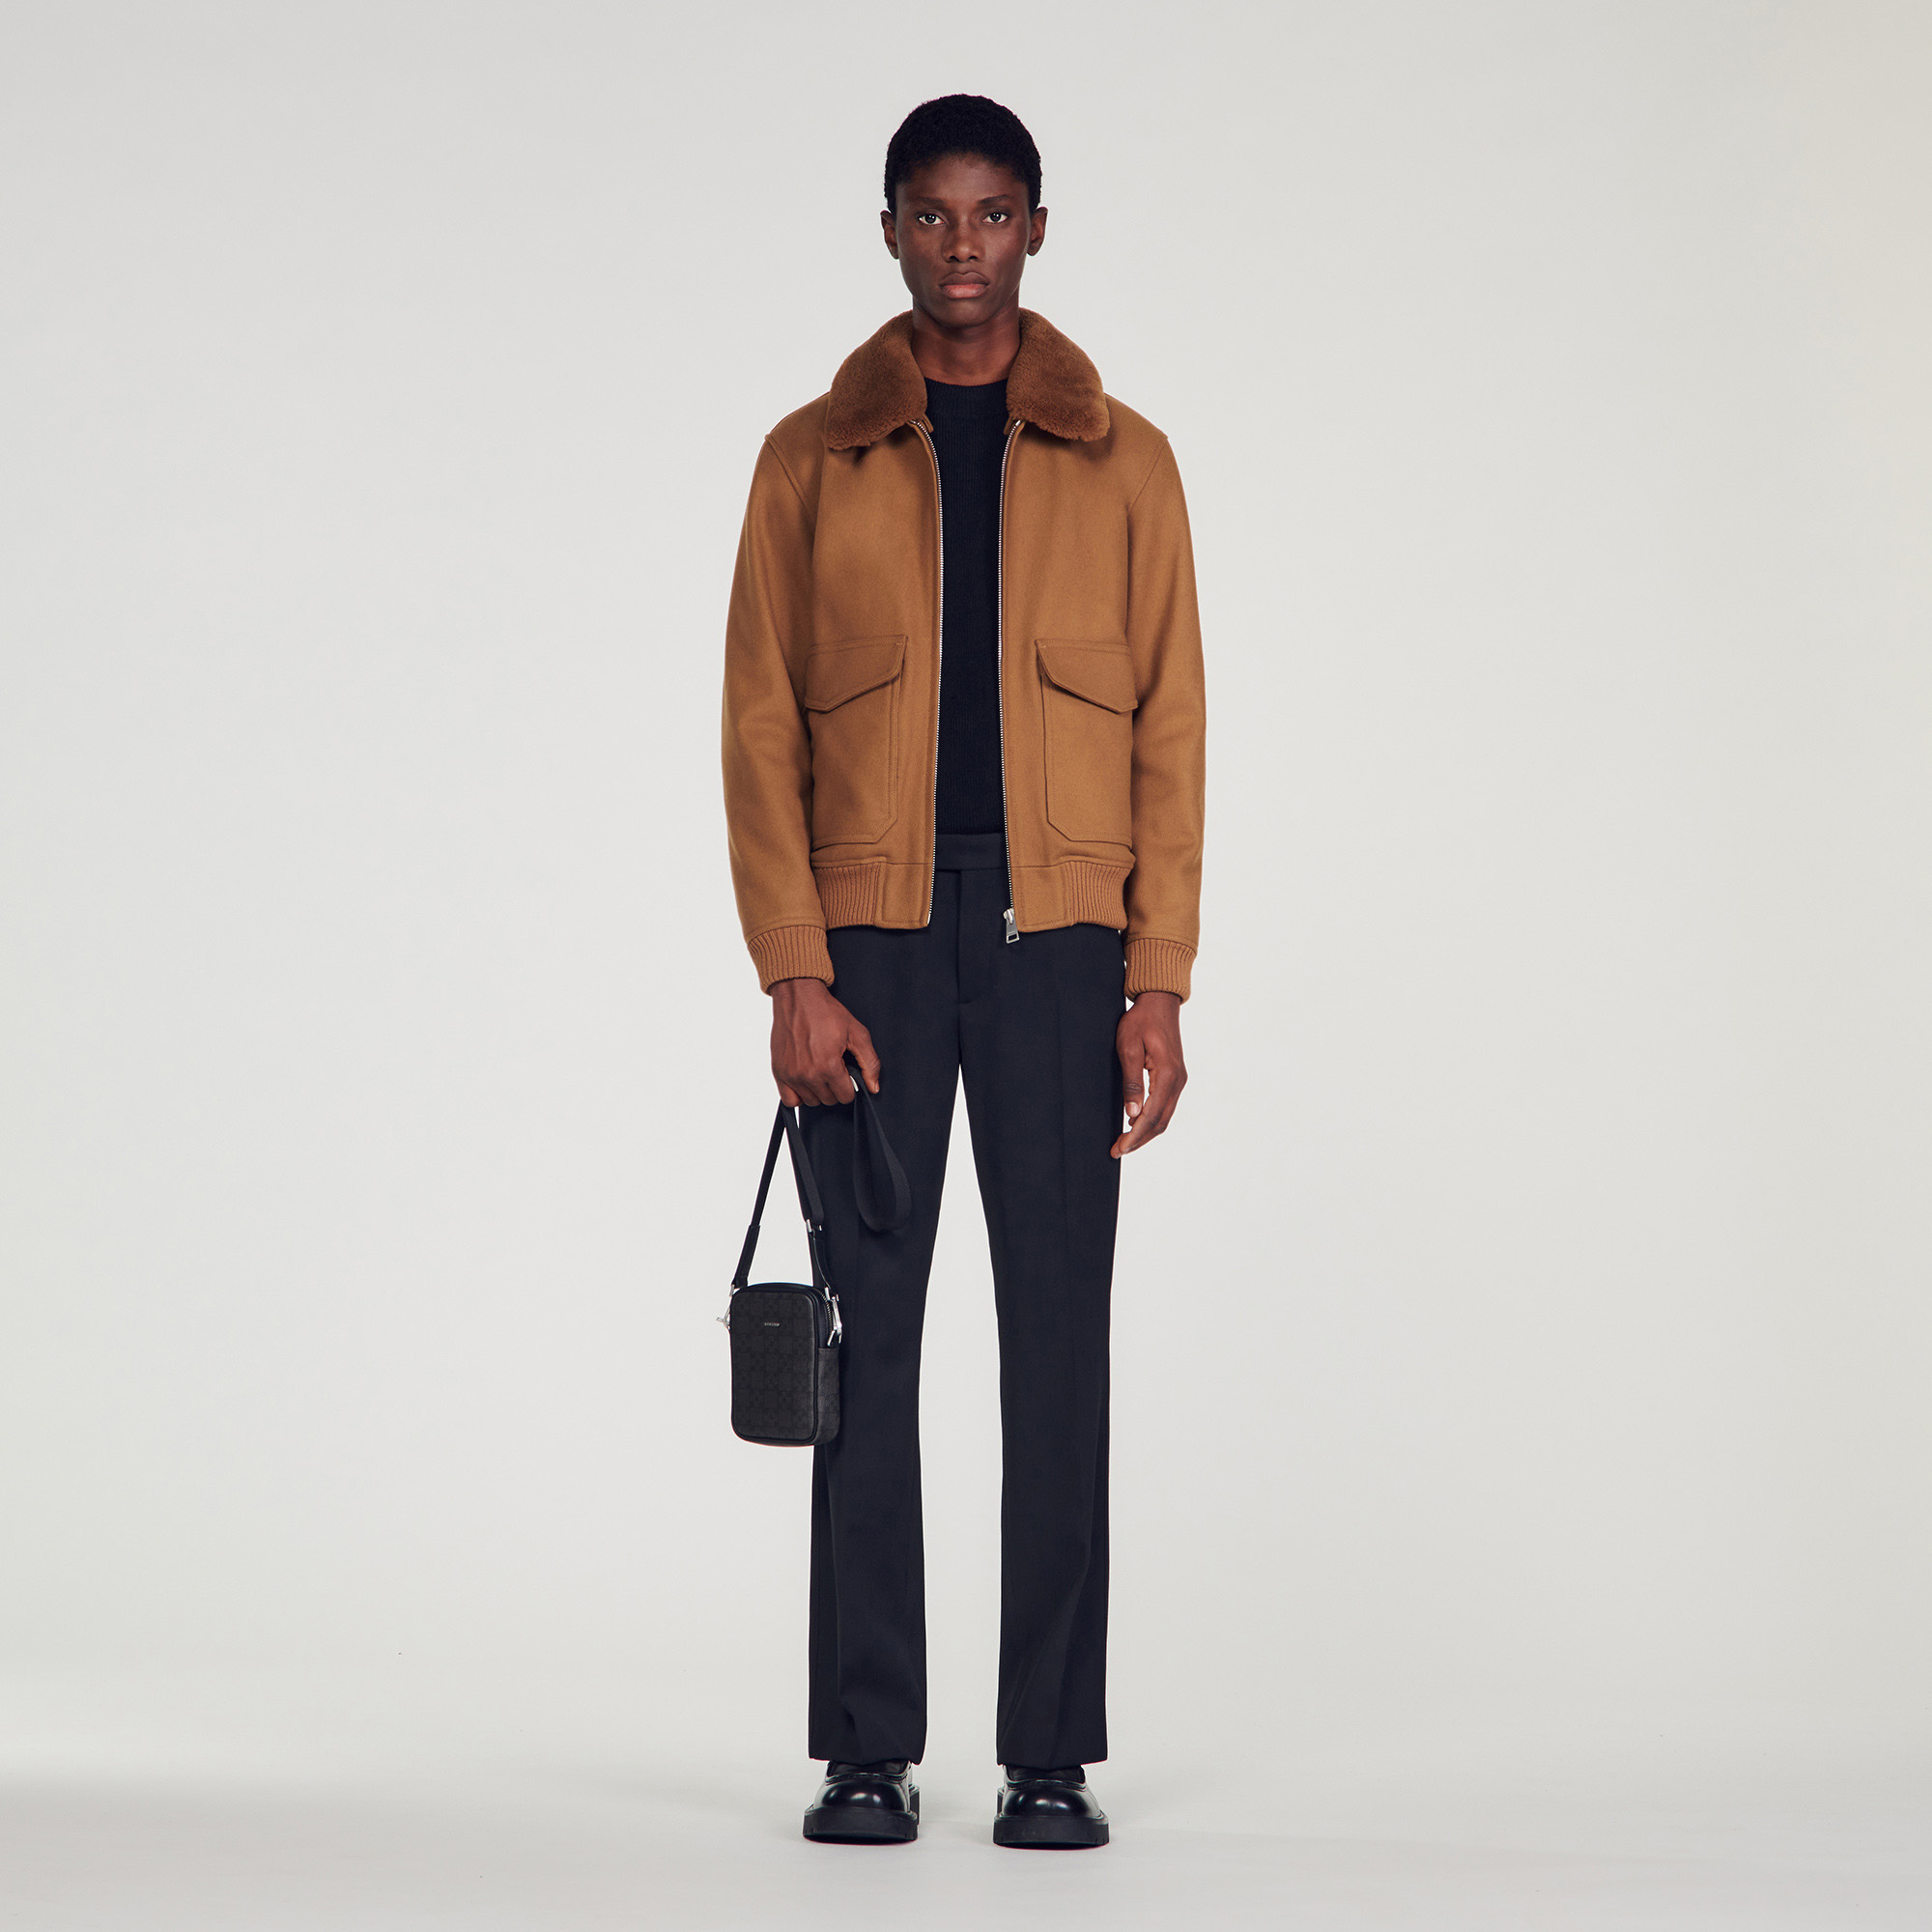 Sandro wool Sandro men's jacket â€¢ Aviator jacket â€¢ Detachable sheepskin collar â€¢ Two flap pockets â€¢ Ribbed edging on the cuffs and back Model is wearing a size S and is 6'2''